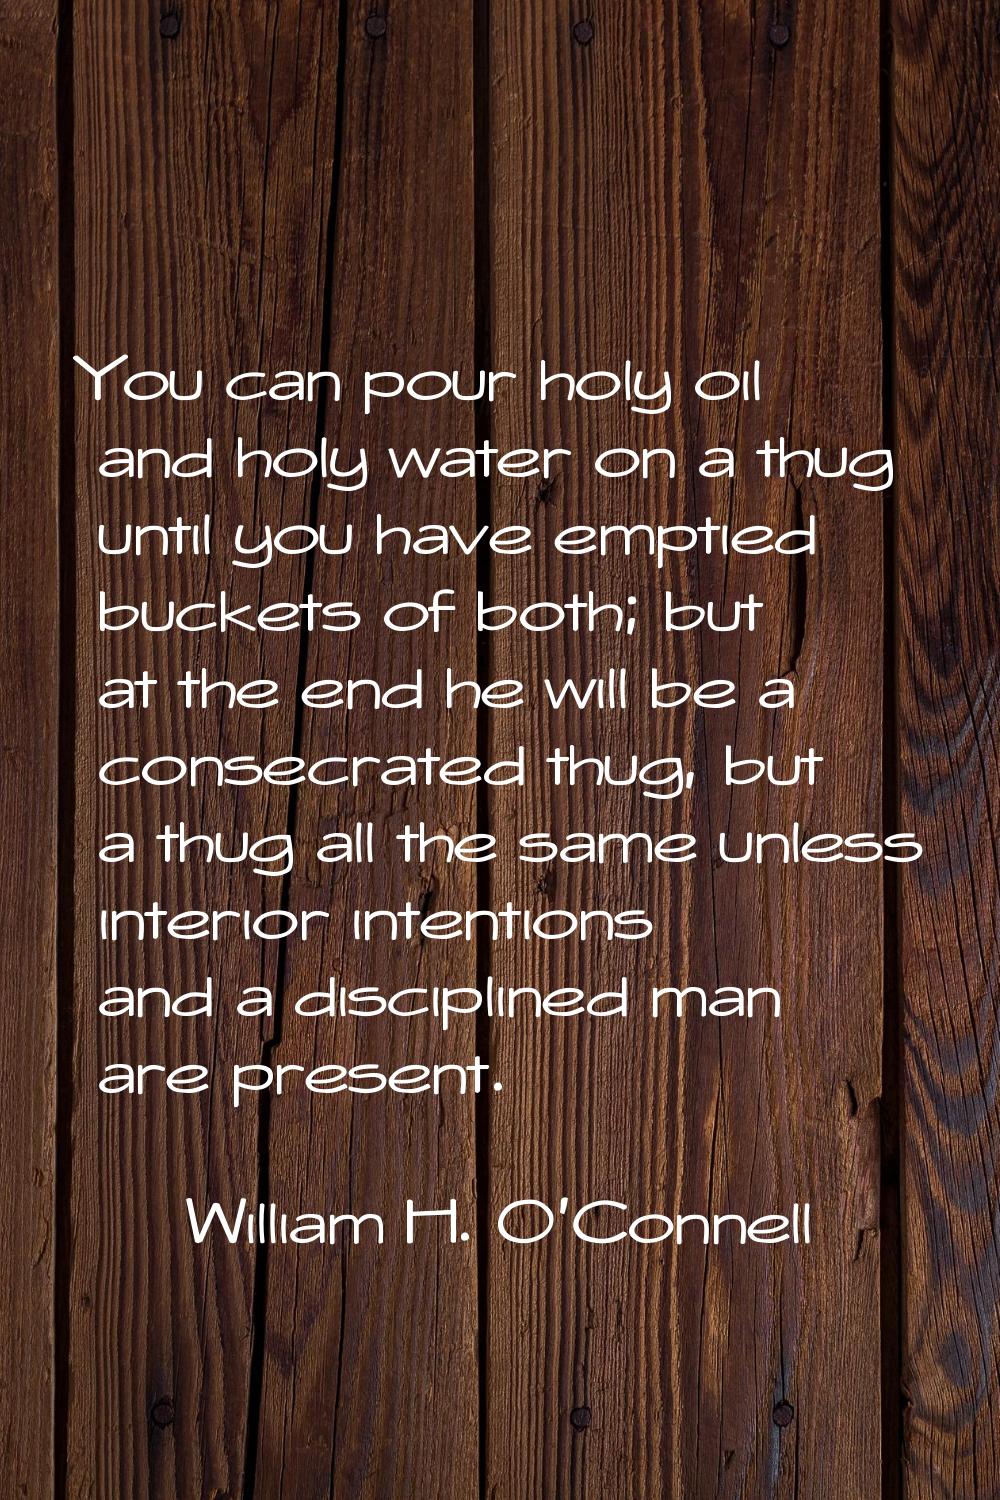 You can pour holy oil and holy water on a thug until you have emptied buckets of both; but at the e